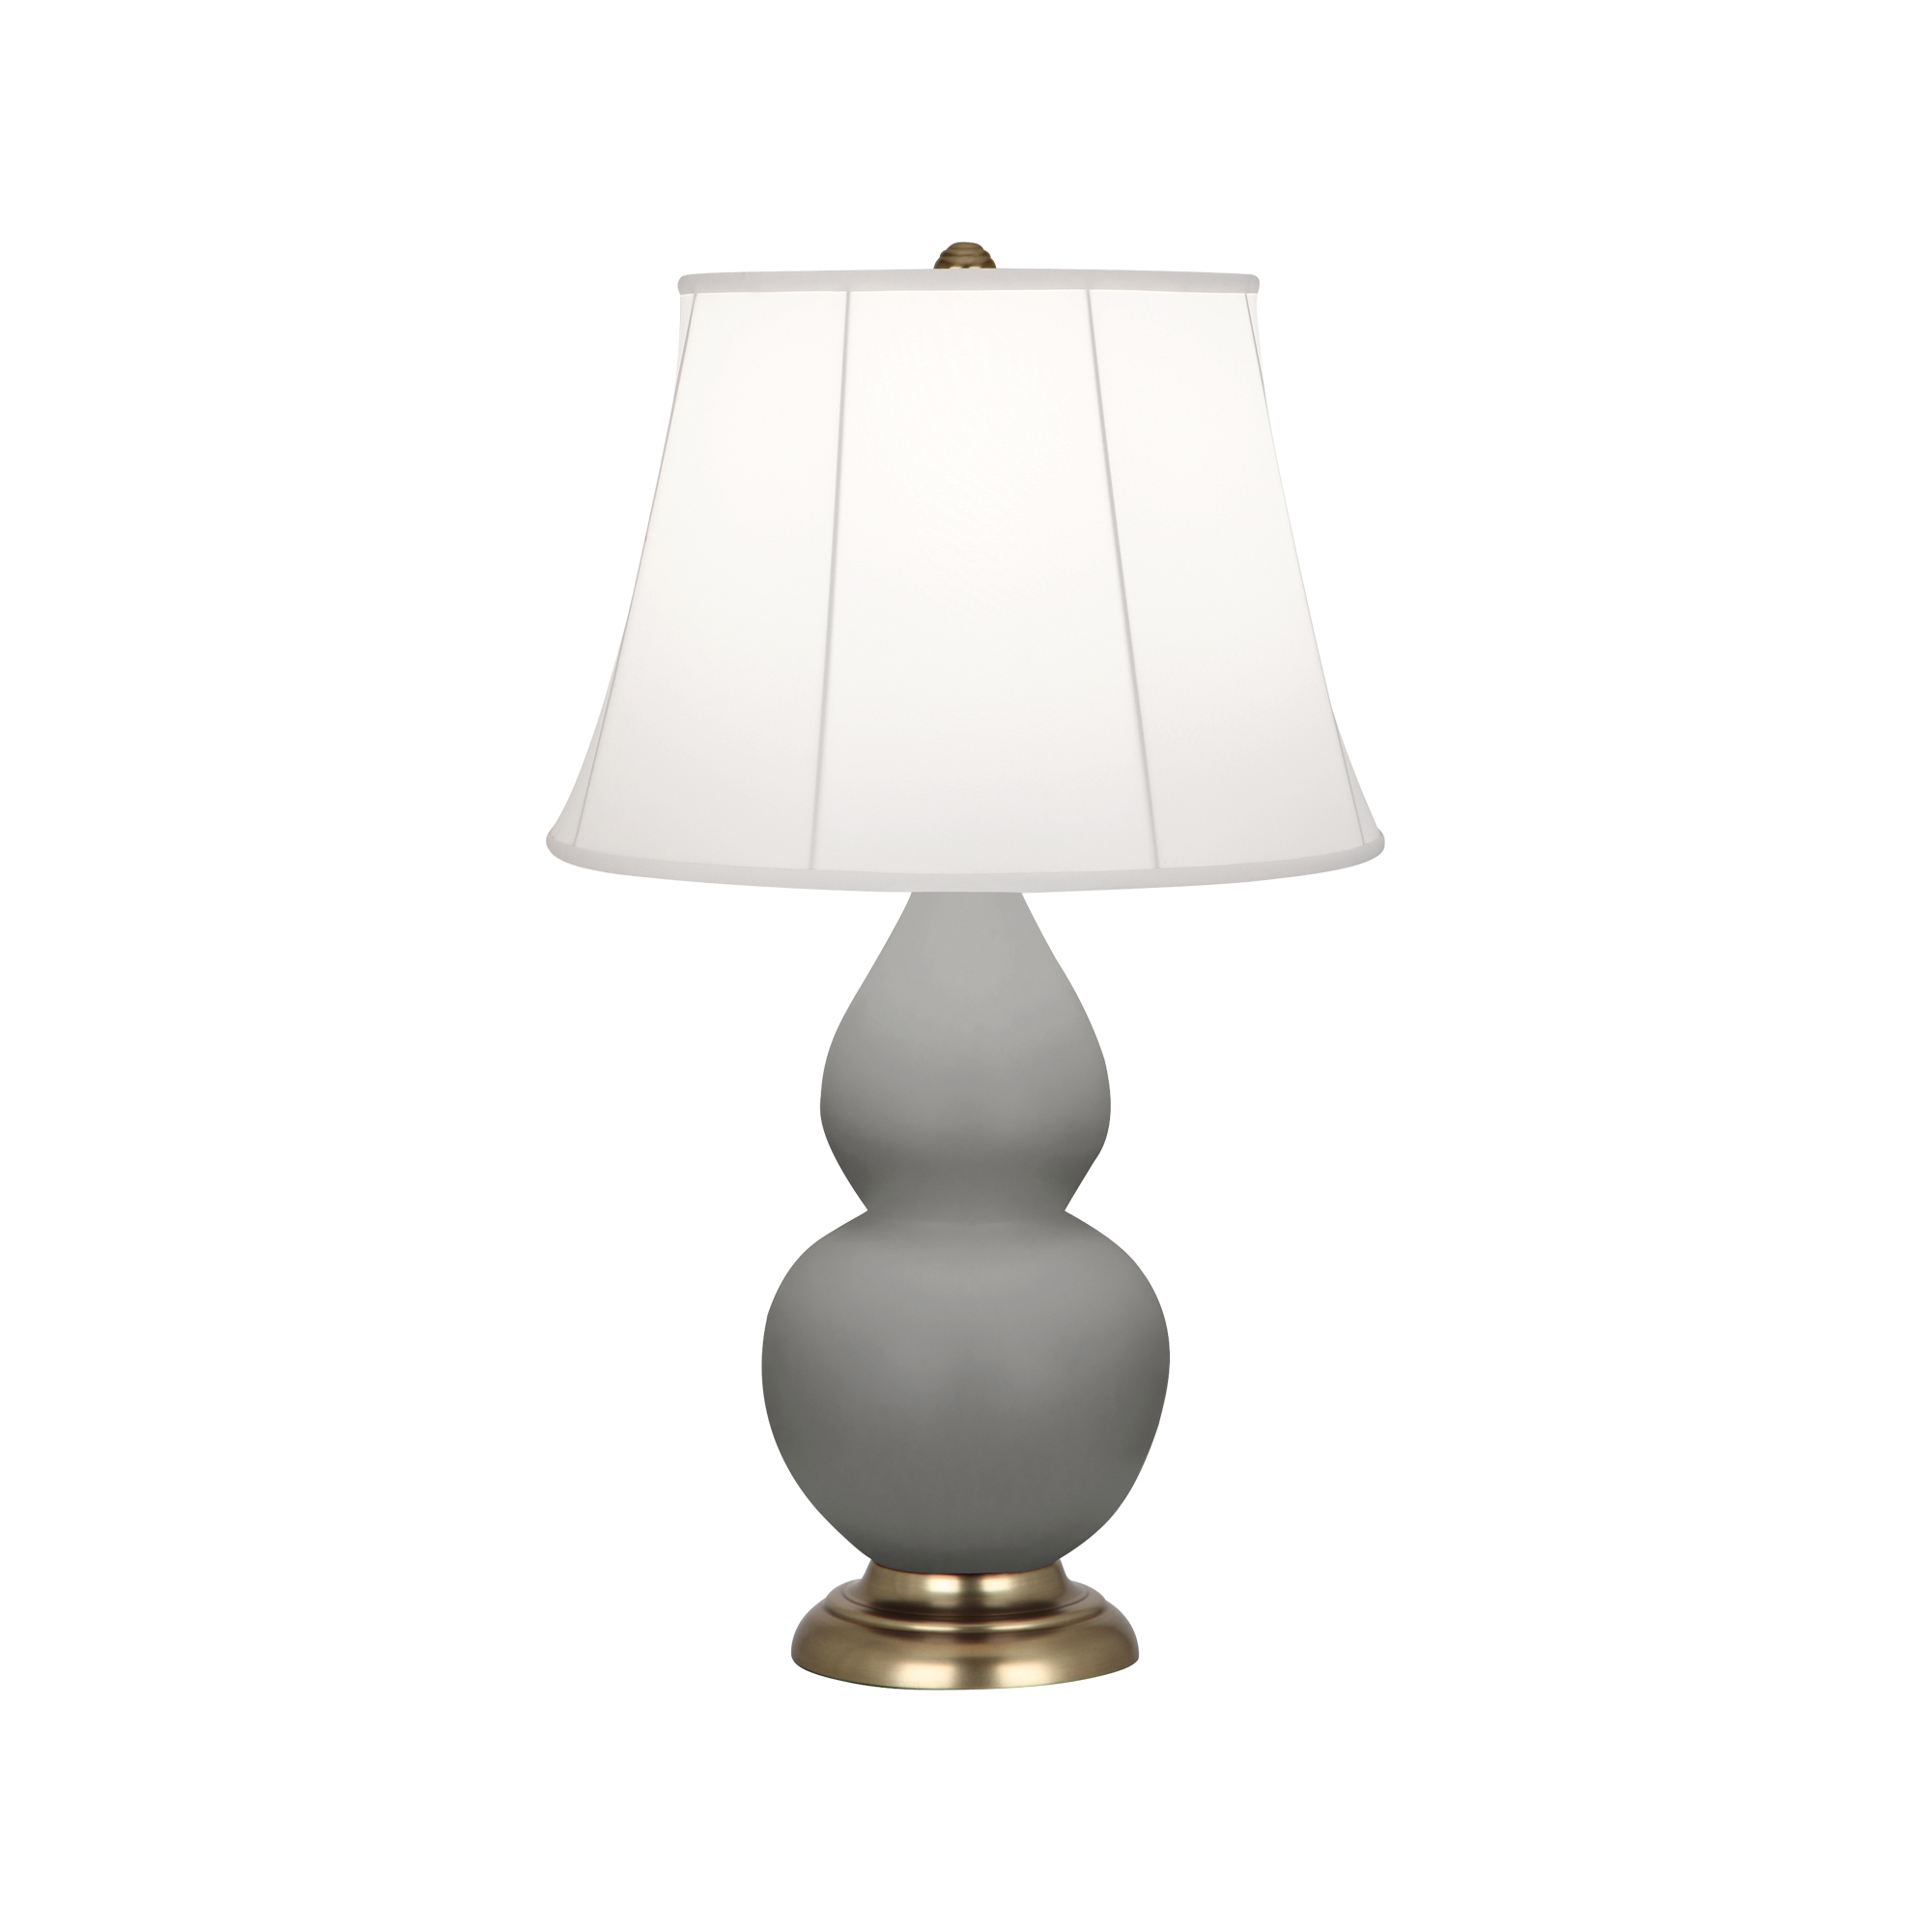 Small Double Gourd Accent Lamp Style #MST14